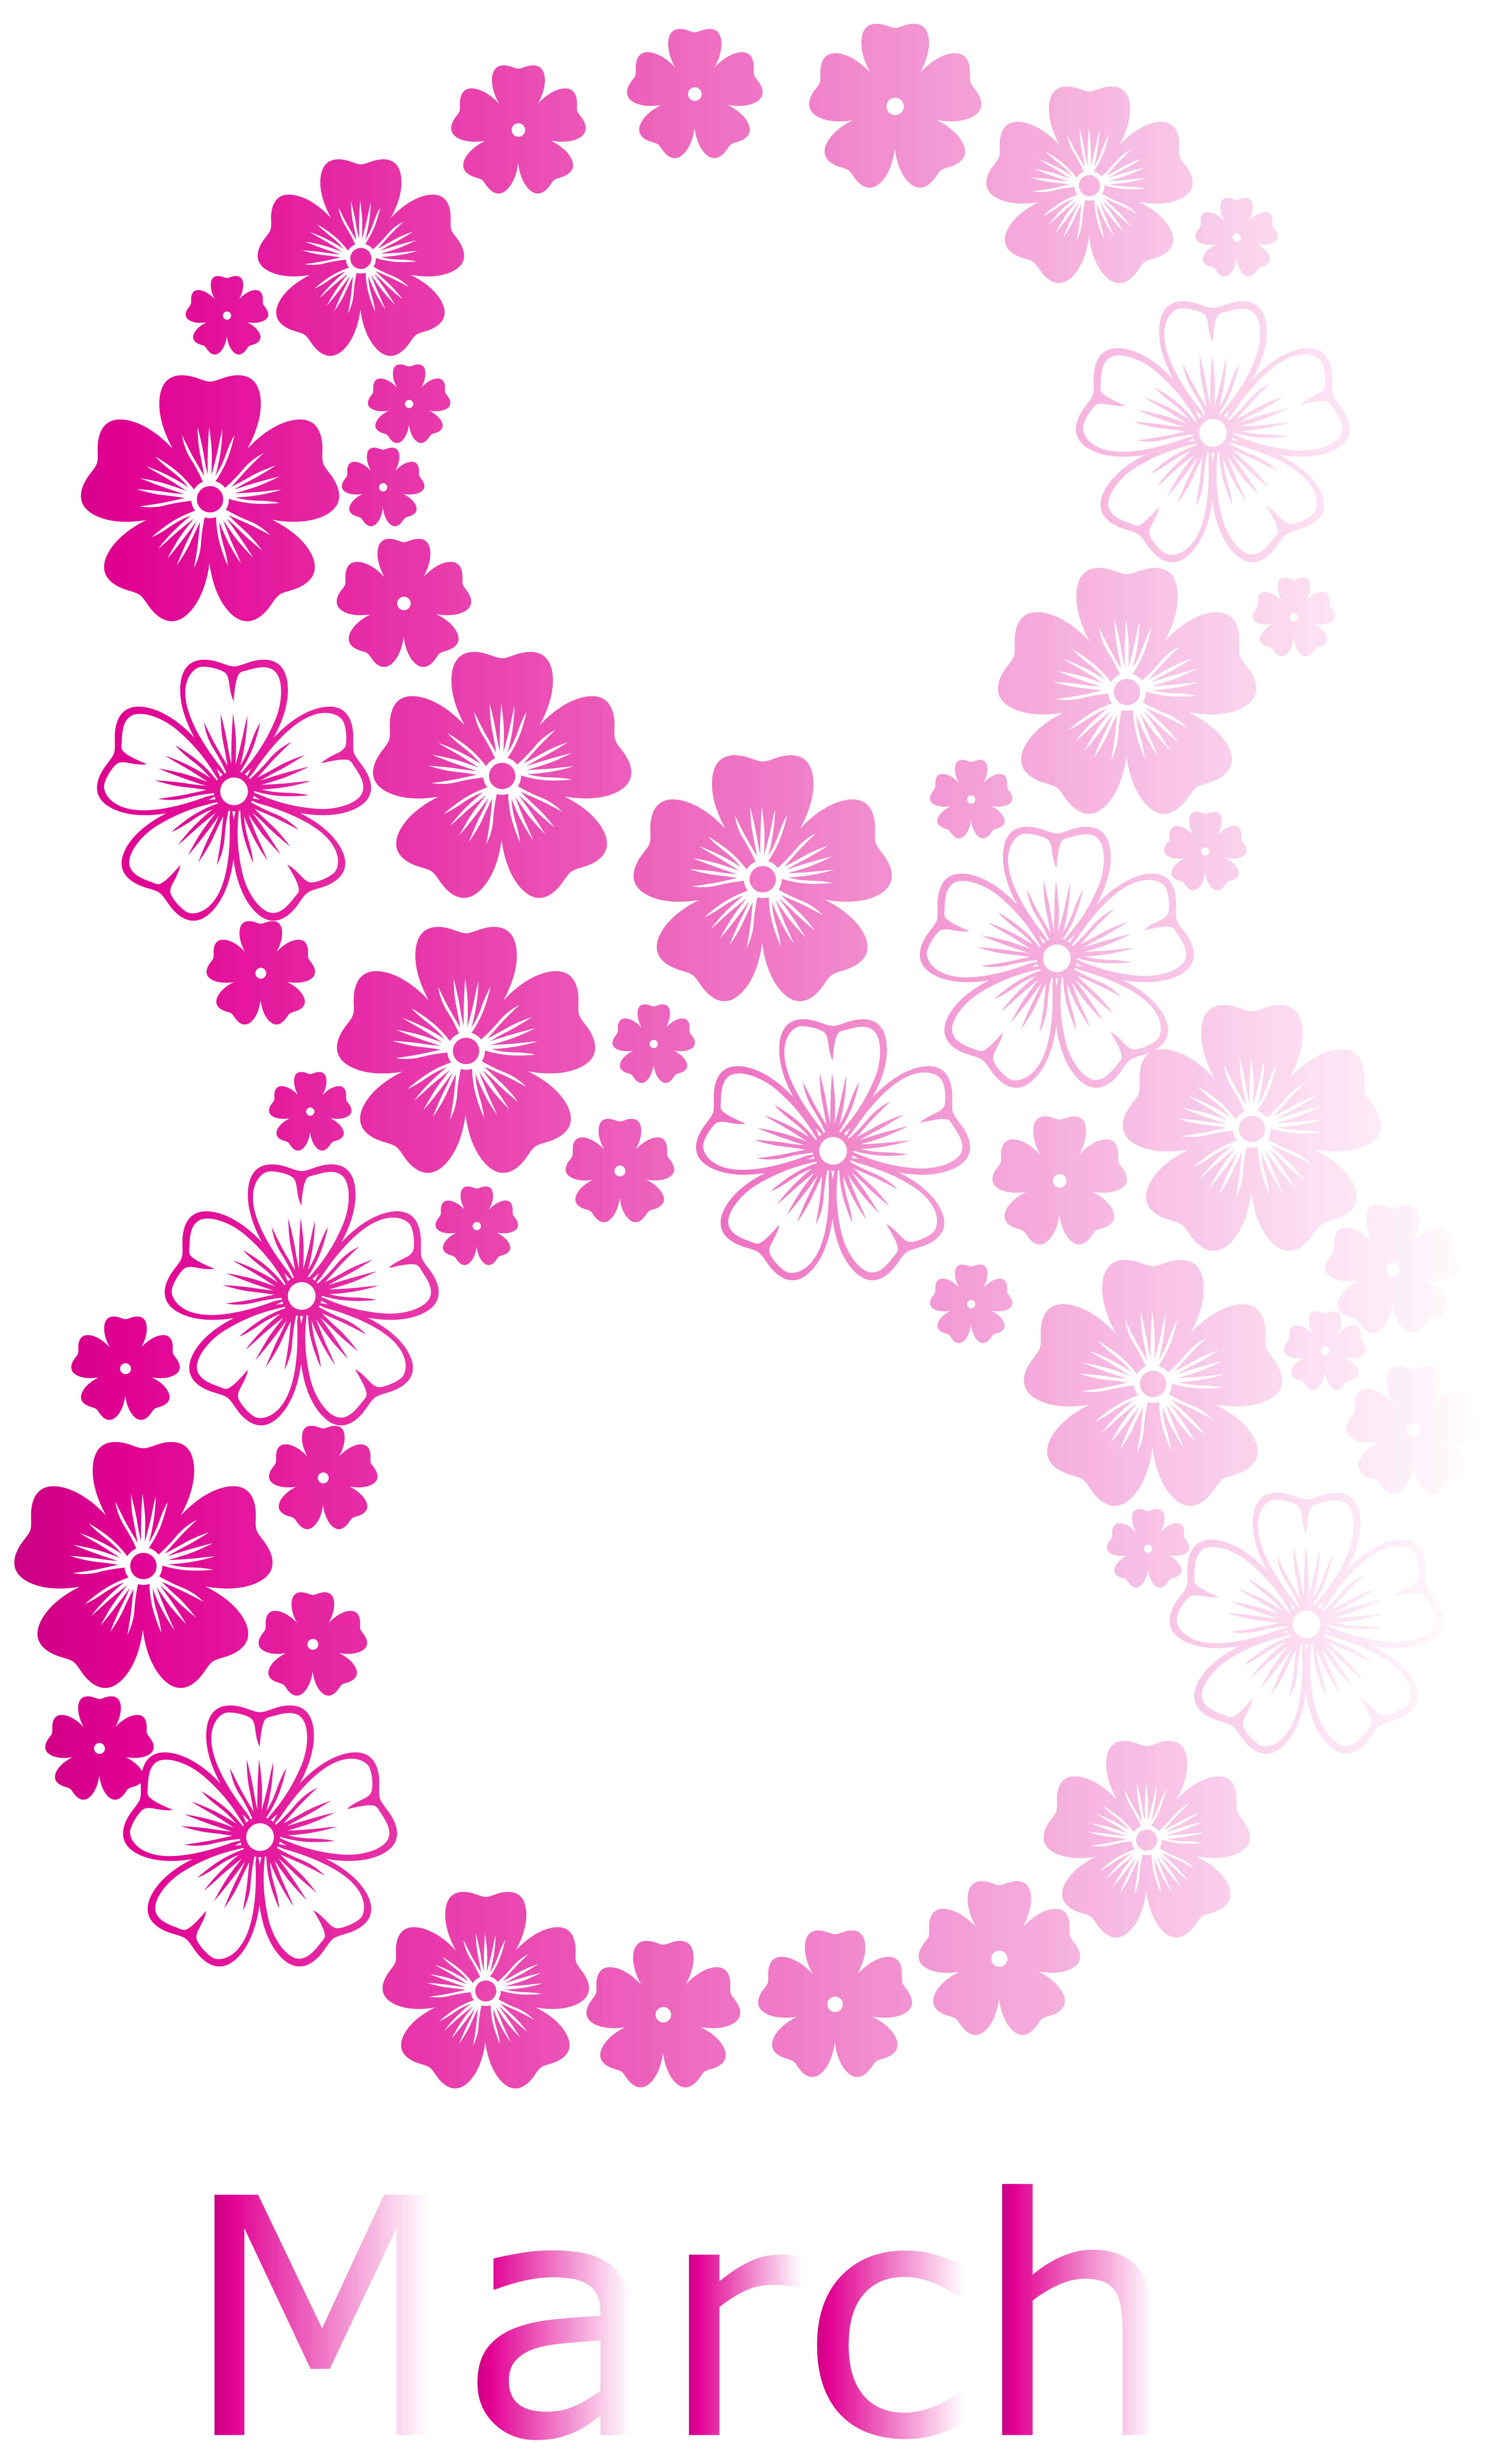 March clipart floral. Pink womens day png